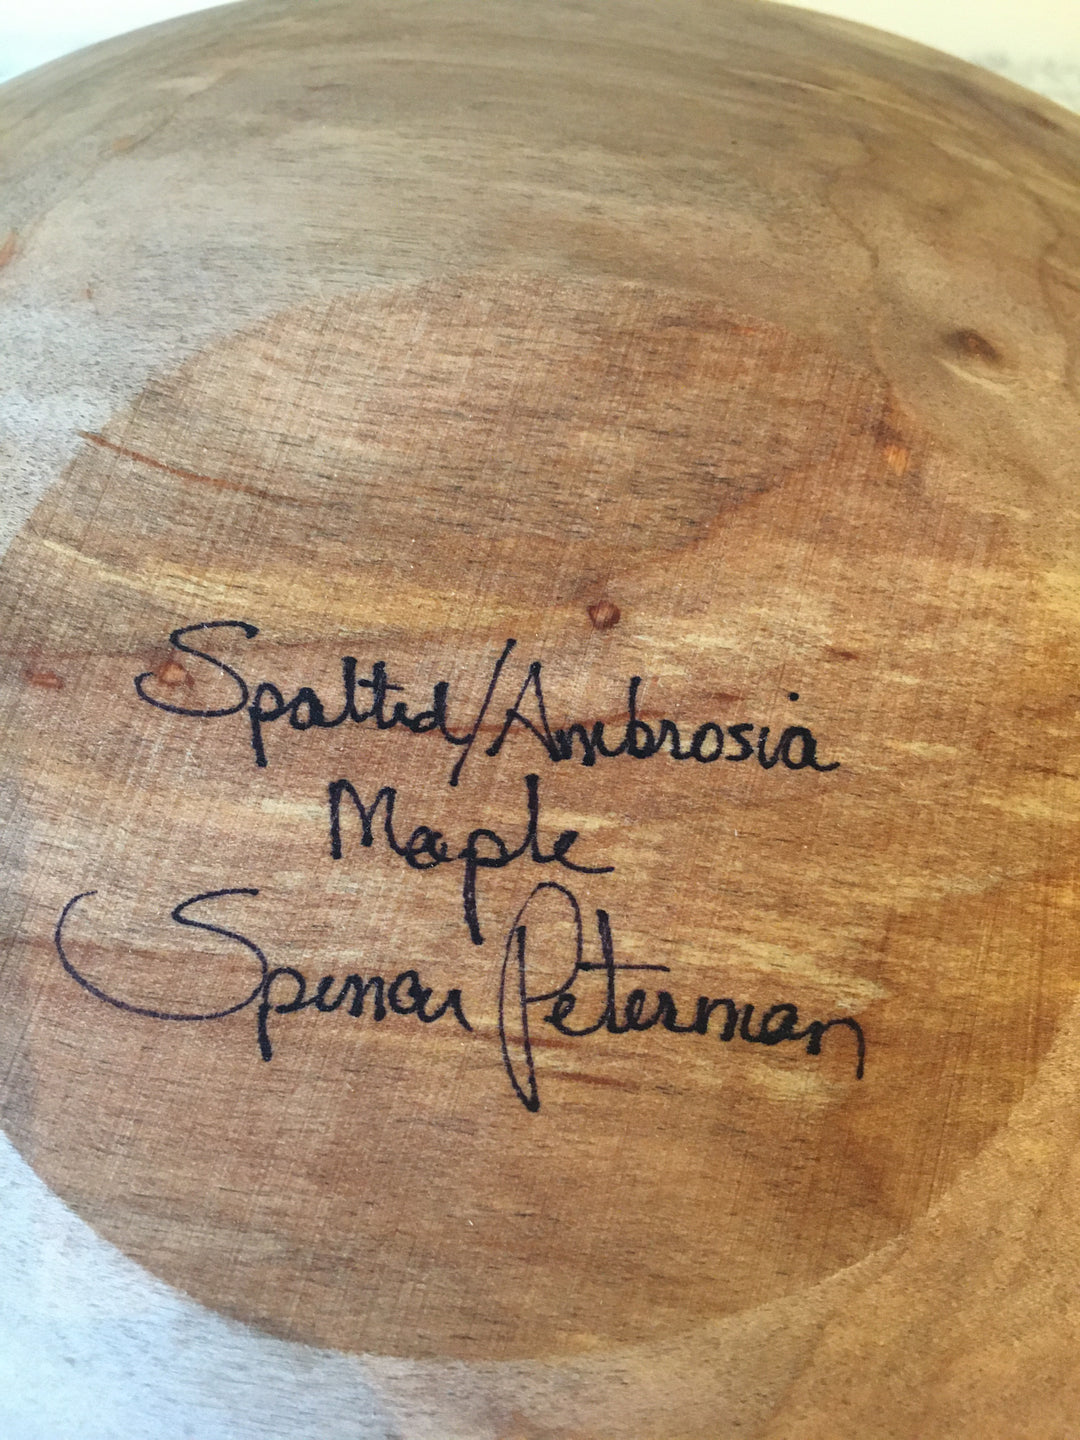 Spencer Peterman - Classic Spalted Maple Bowl | B | 15"